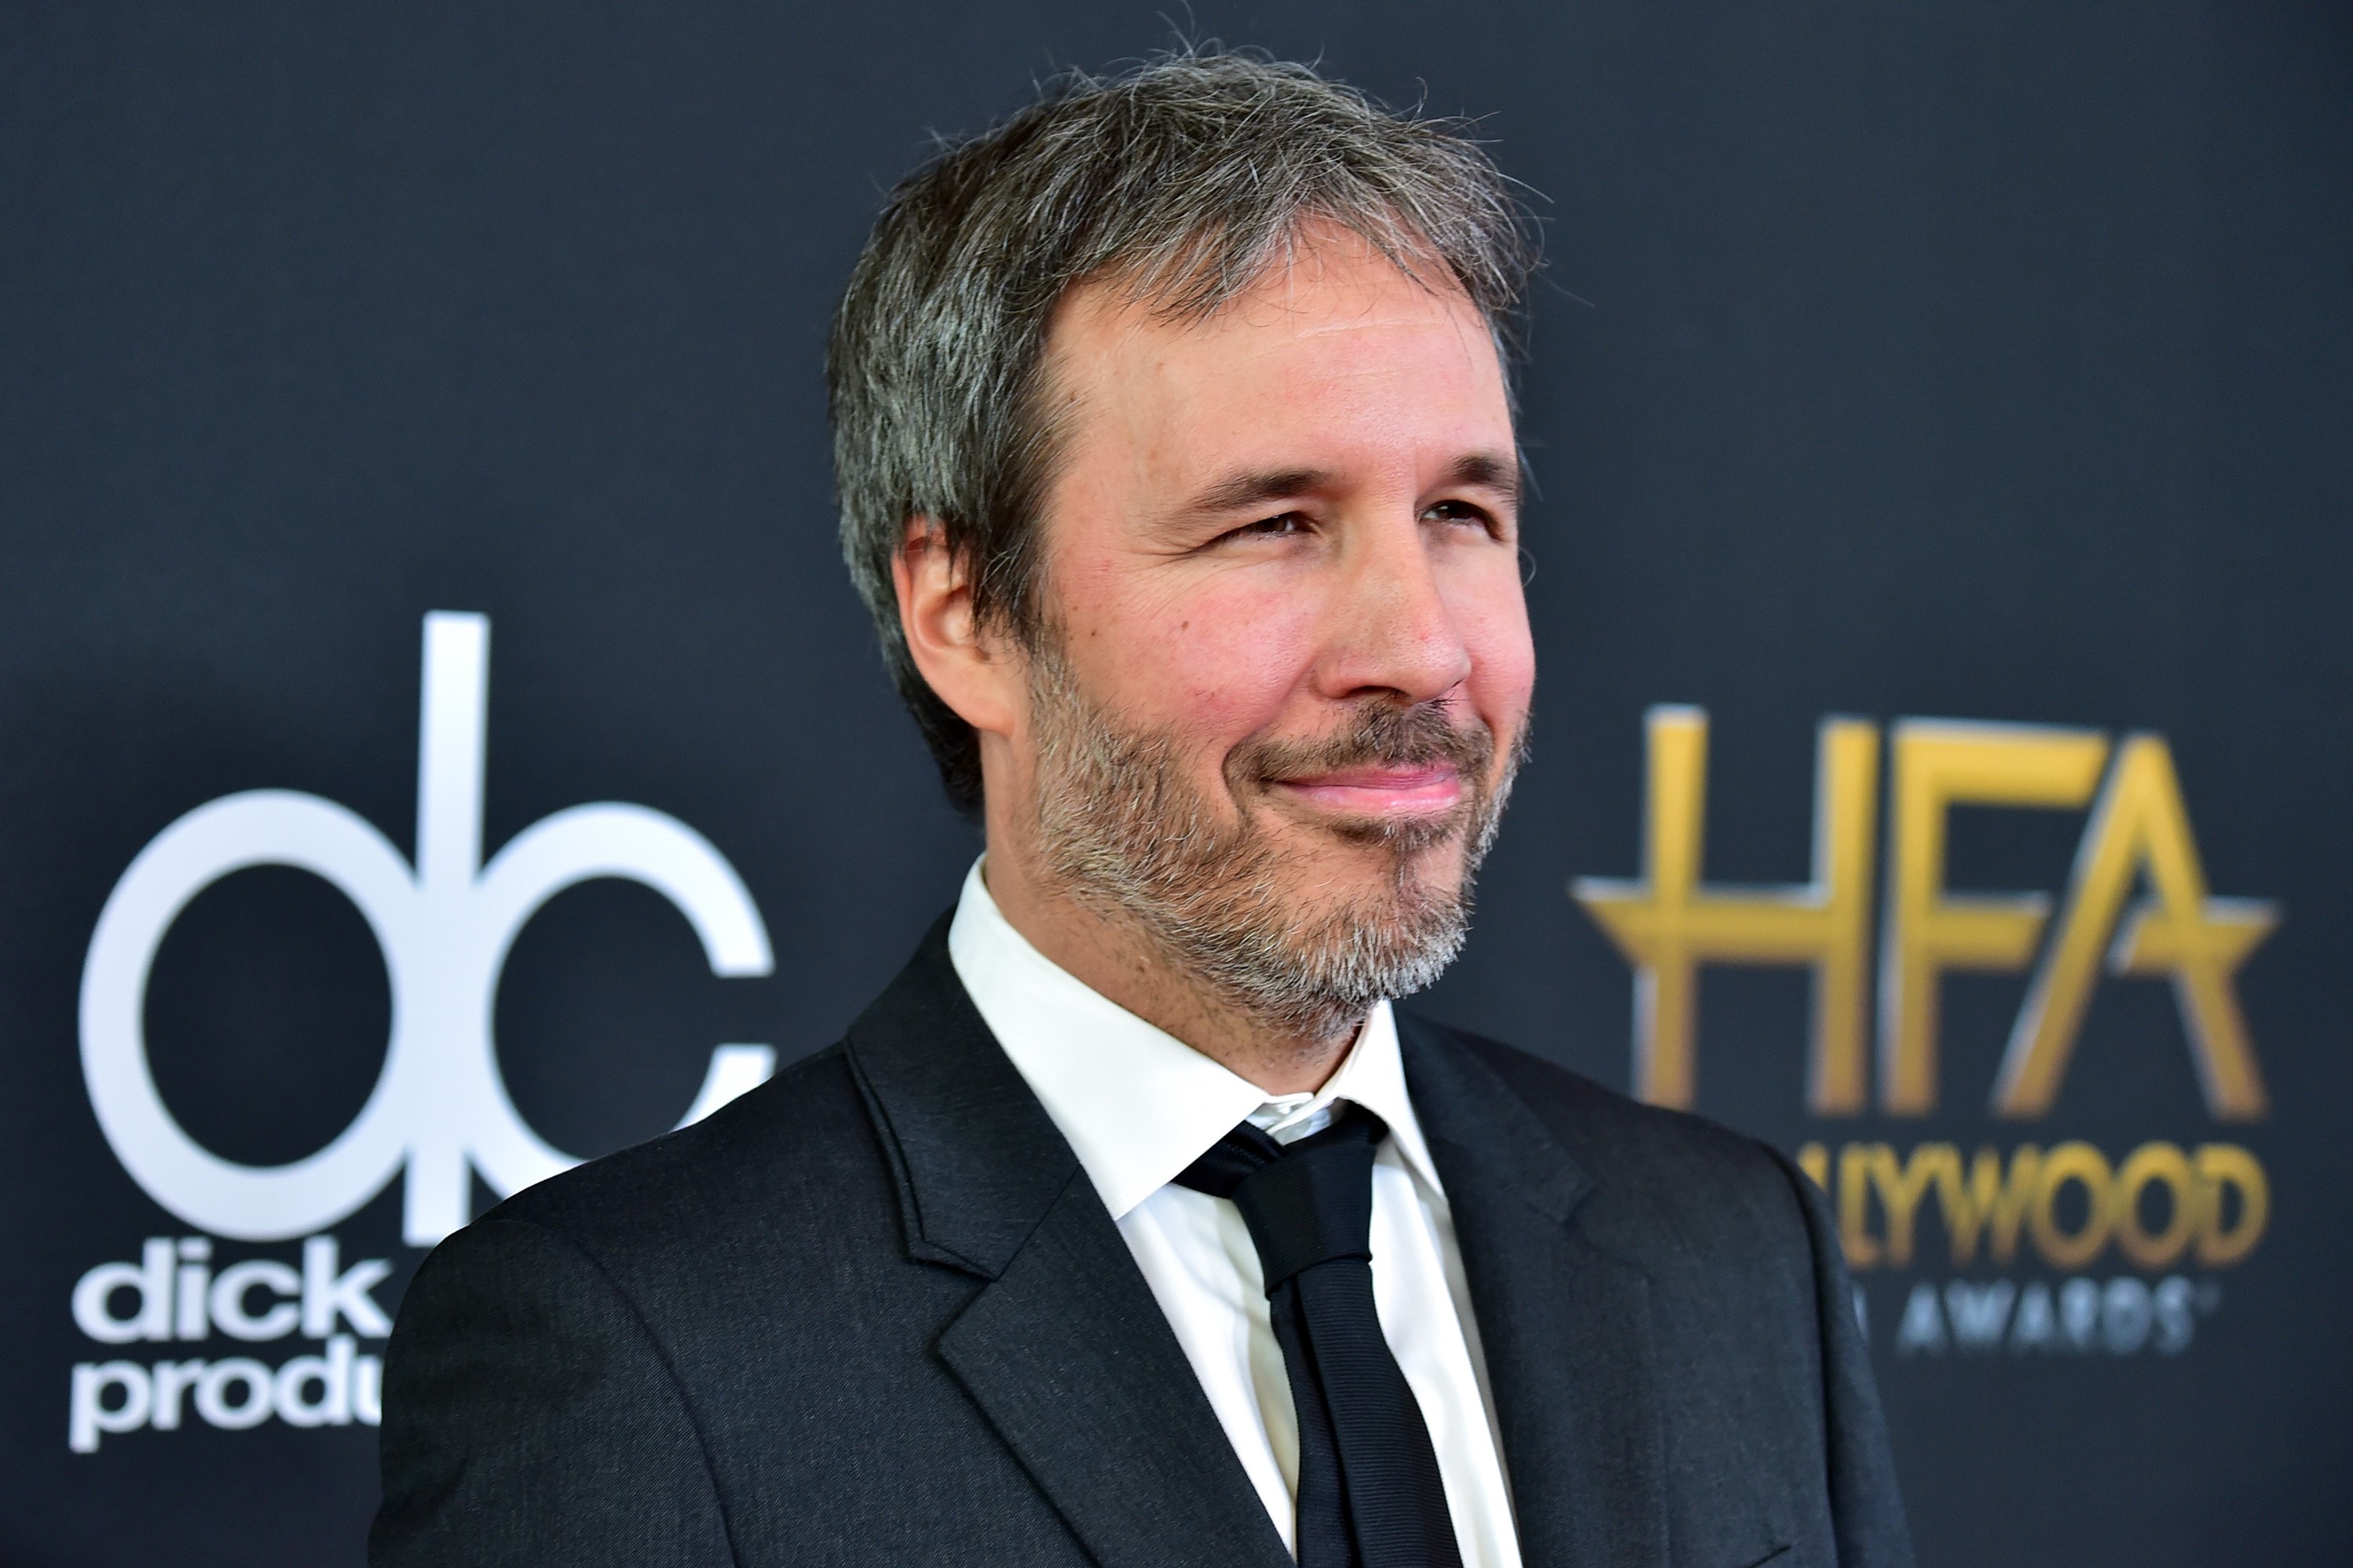 Denis Villeneuve in a black suit at the Annual Hollywood Film Awards in 2017.